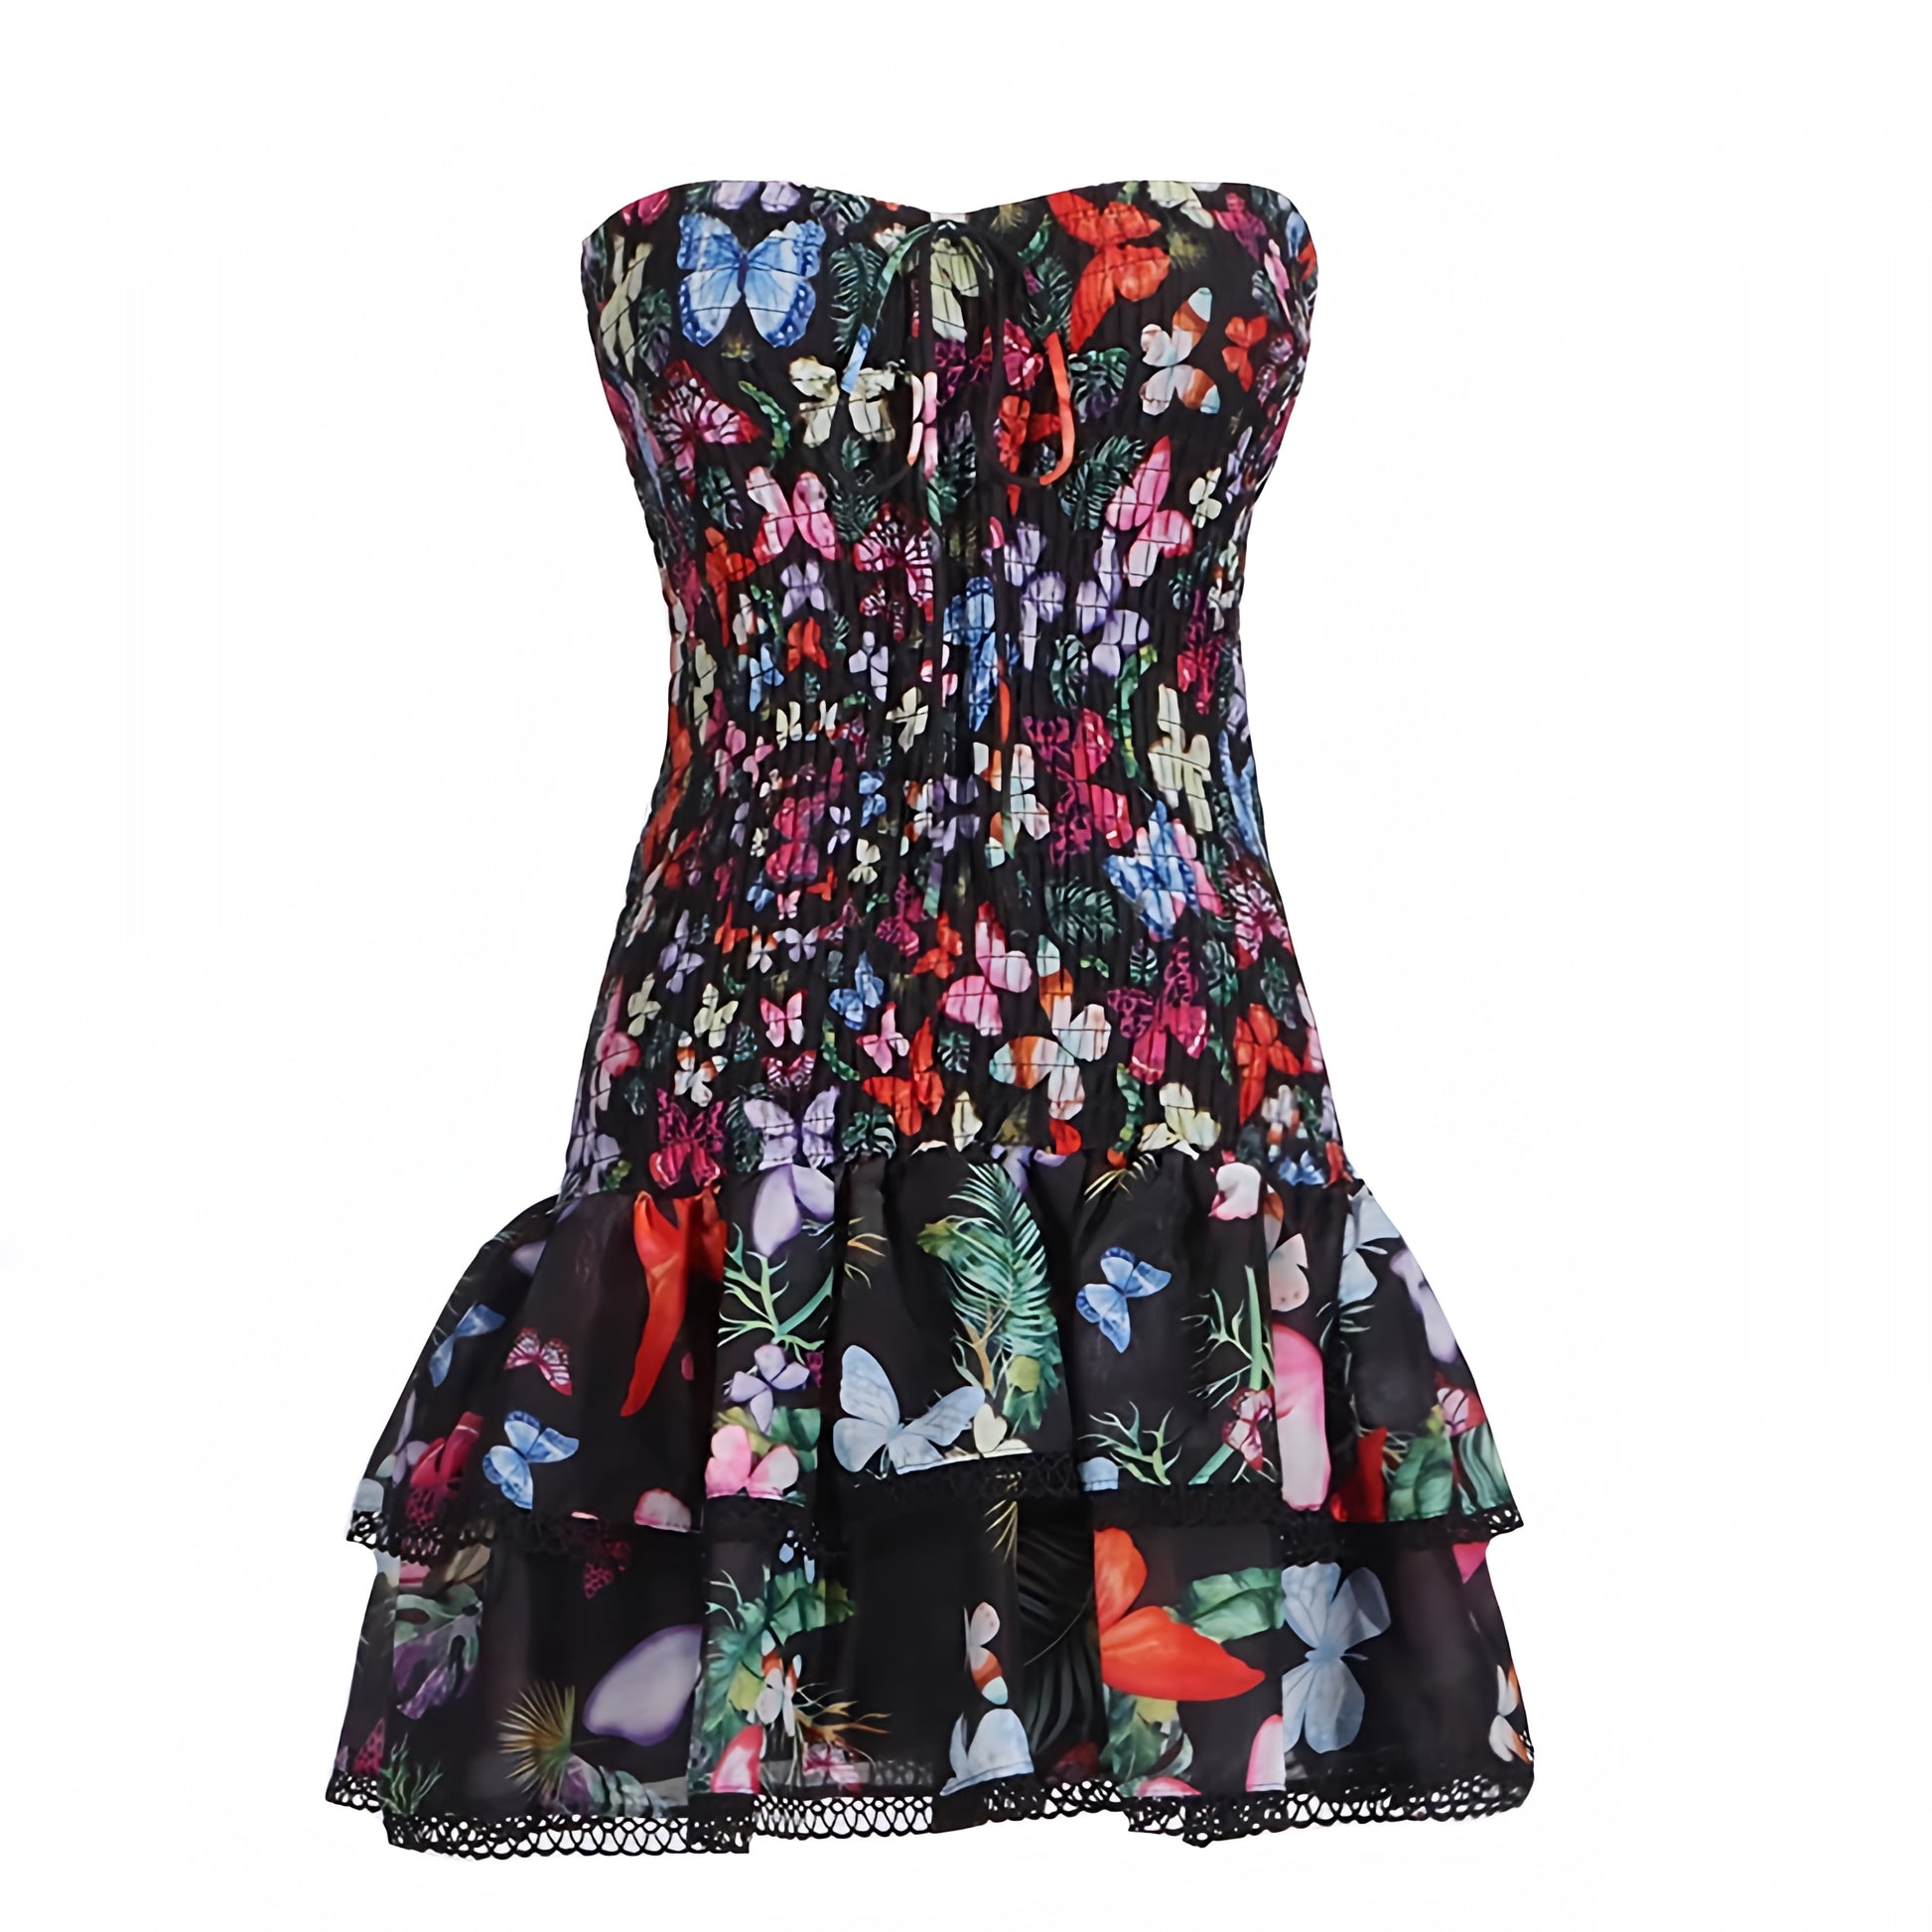 floral-print-black-rainbow-red-blue-pink-green-multi-color-butterfly-patterned-slim-bodycon-embroidered-layered-ruffle-trim-smocked-shirred-bodice-drop-waist-fit-and-flare-sweetheart-neckline-strapless-bandeau-sleeveless-spaghetti-strap-halter-tiered-flowy-boho-bohemian-short-mini-dress-couture-women-ladies-teens-tweens-chic-trendy-spring-2024-summer-elegant-semi-formal-casual-feminine-preppy-style-prom-homecoming-party-tropical-european-sundress-charo-ruiz-zimmerman-altard-state-loveshackfancy-dupe